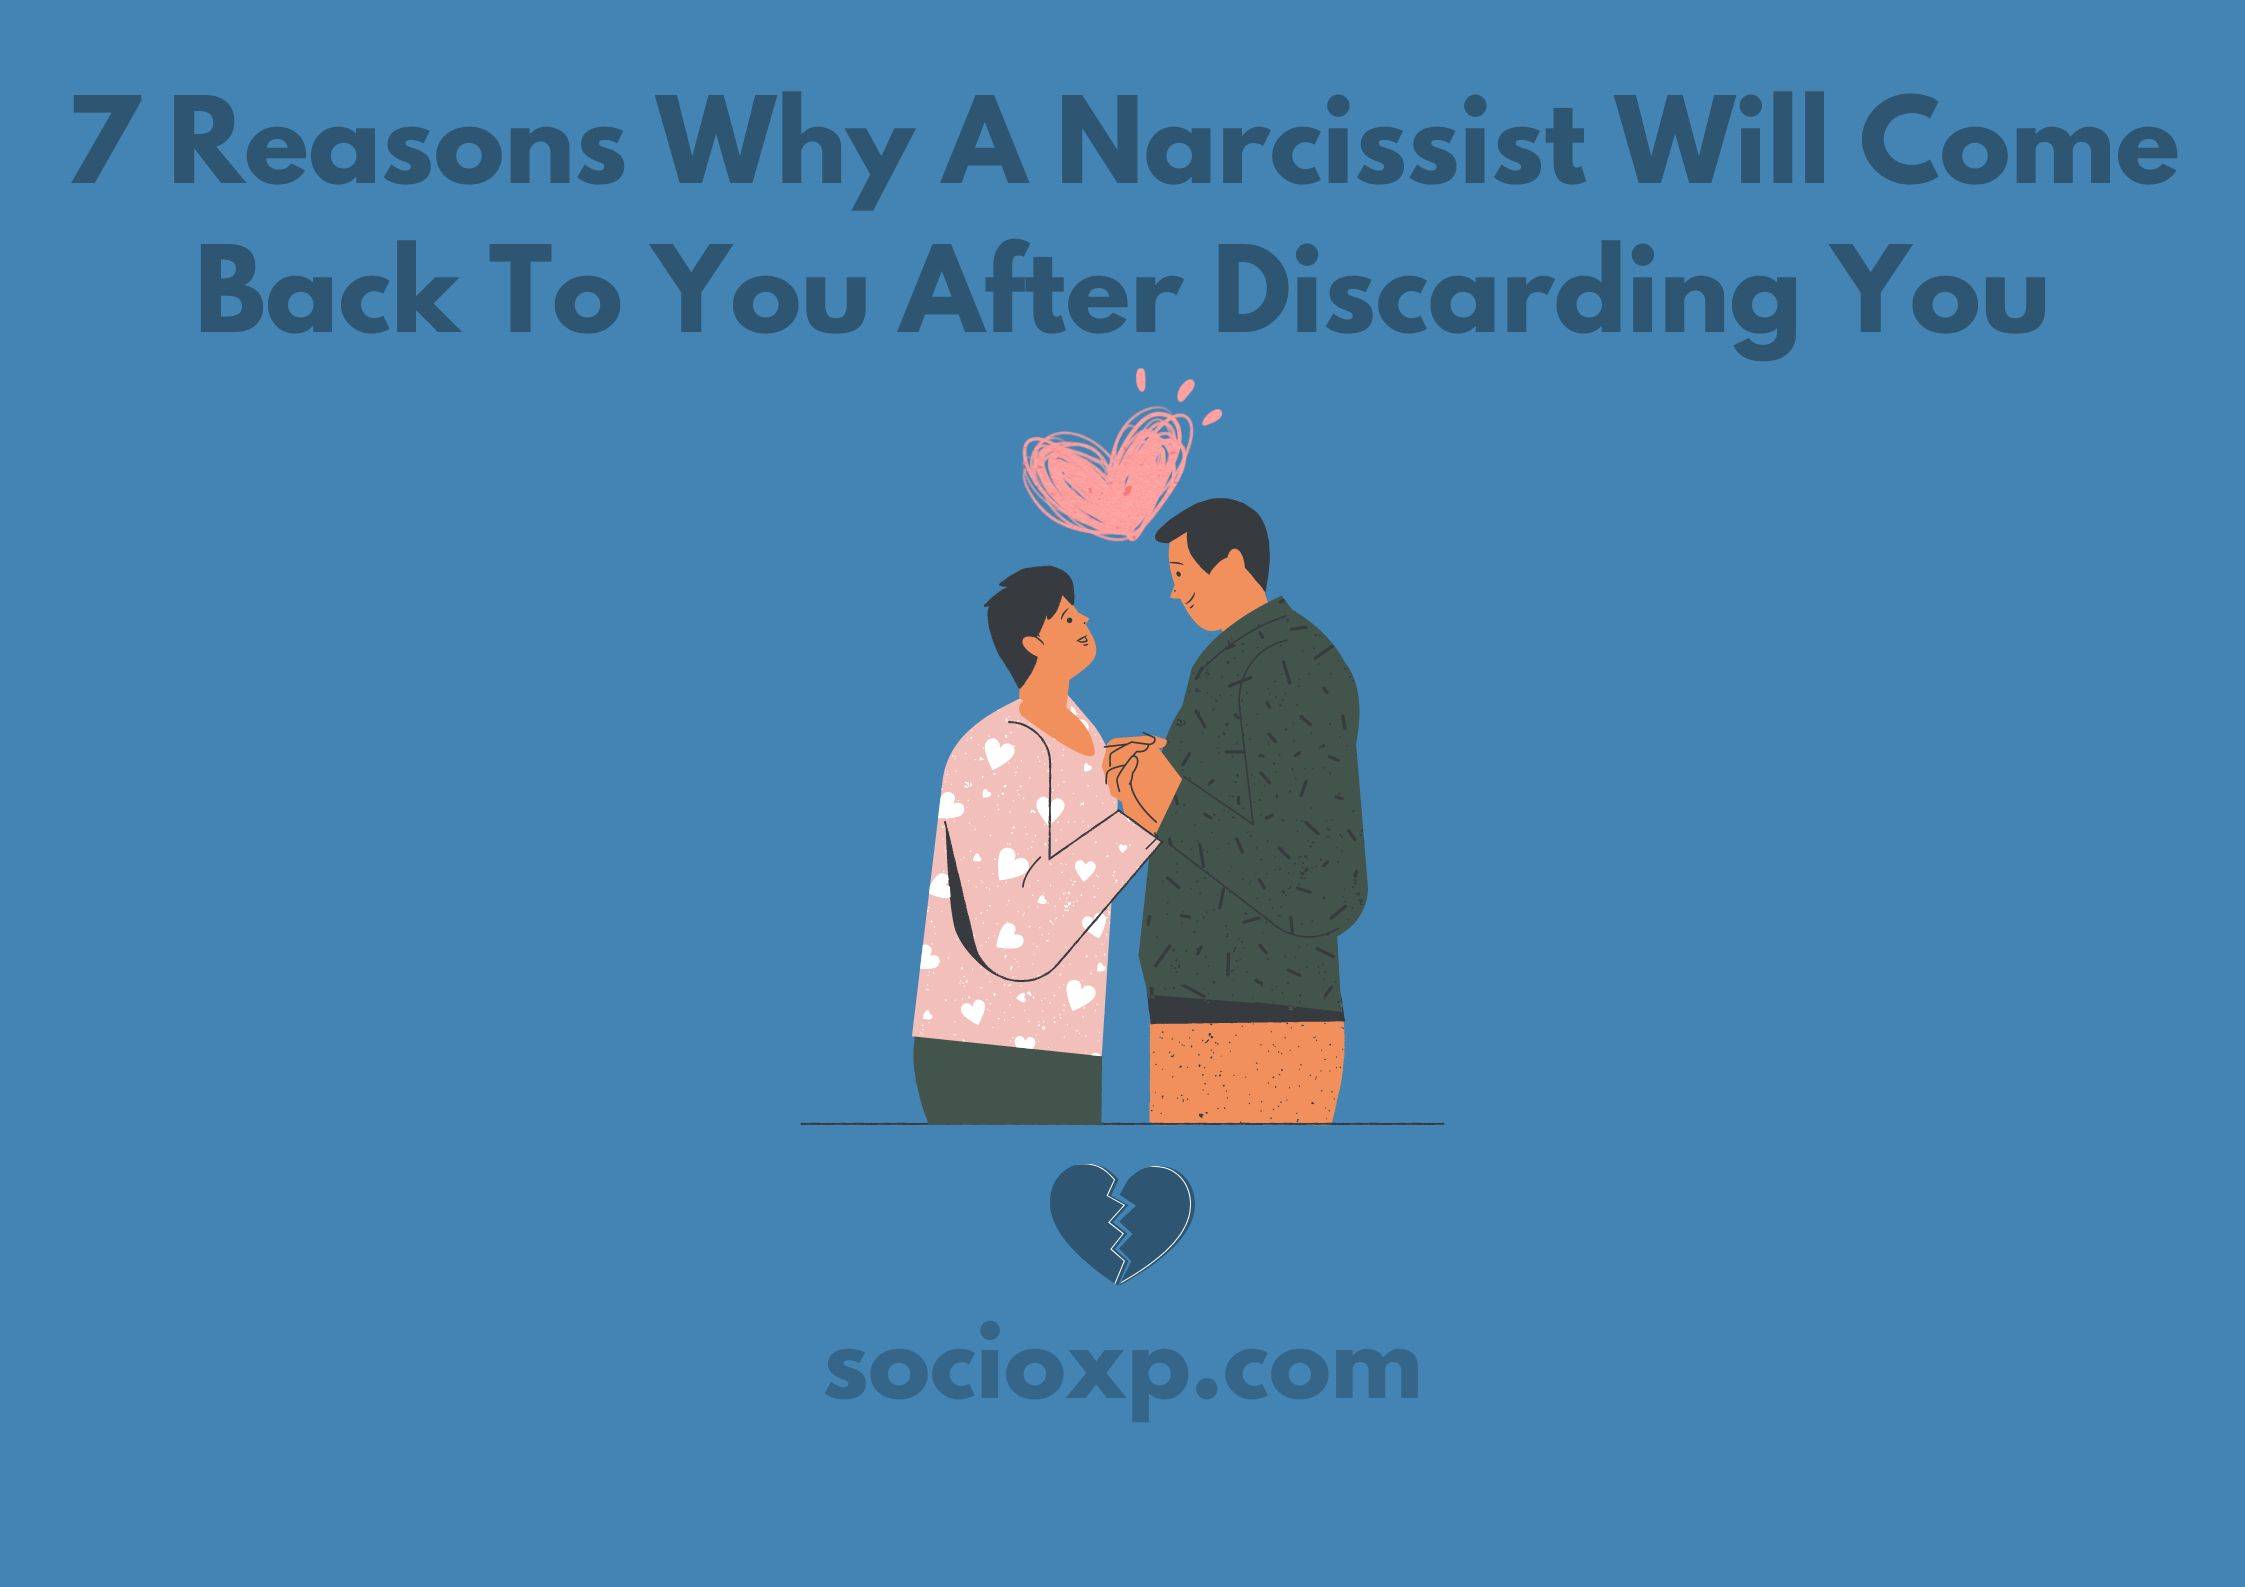 7 Reasons Why A Narcissist Will Come Back To You After Discarding You